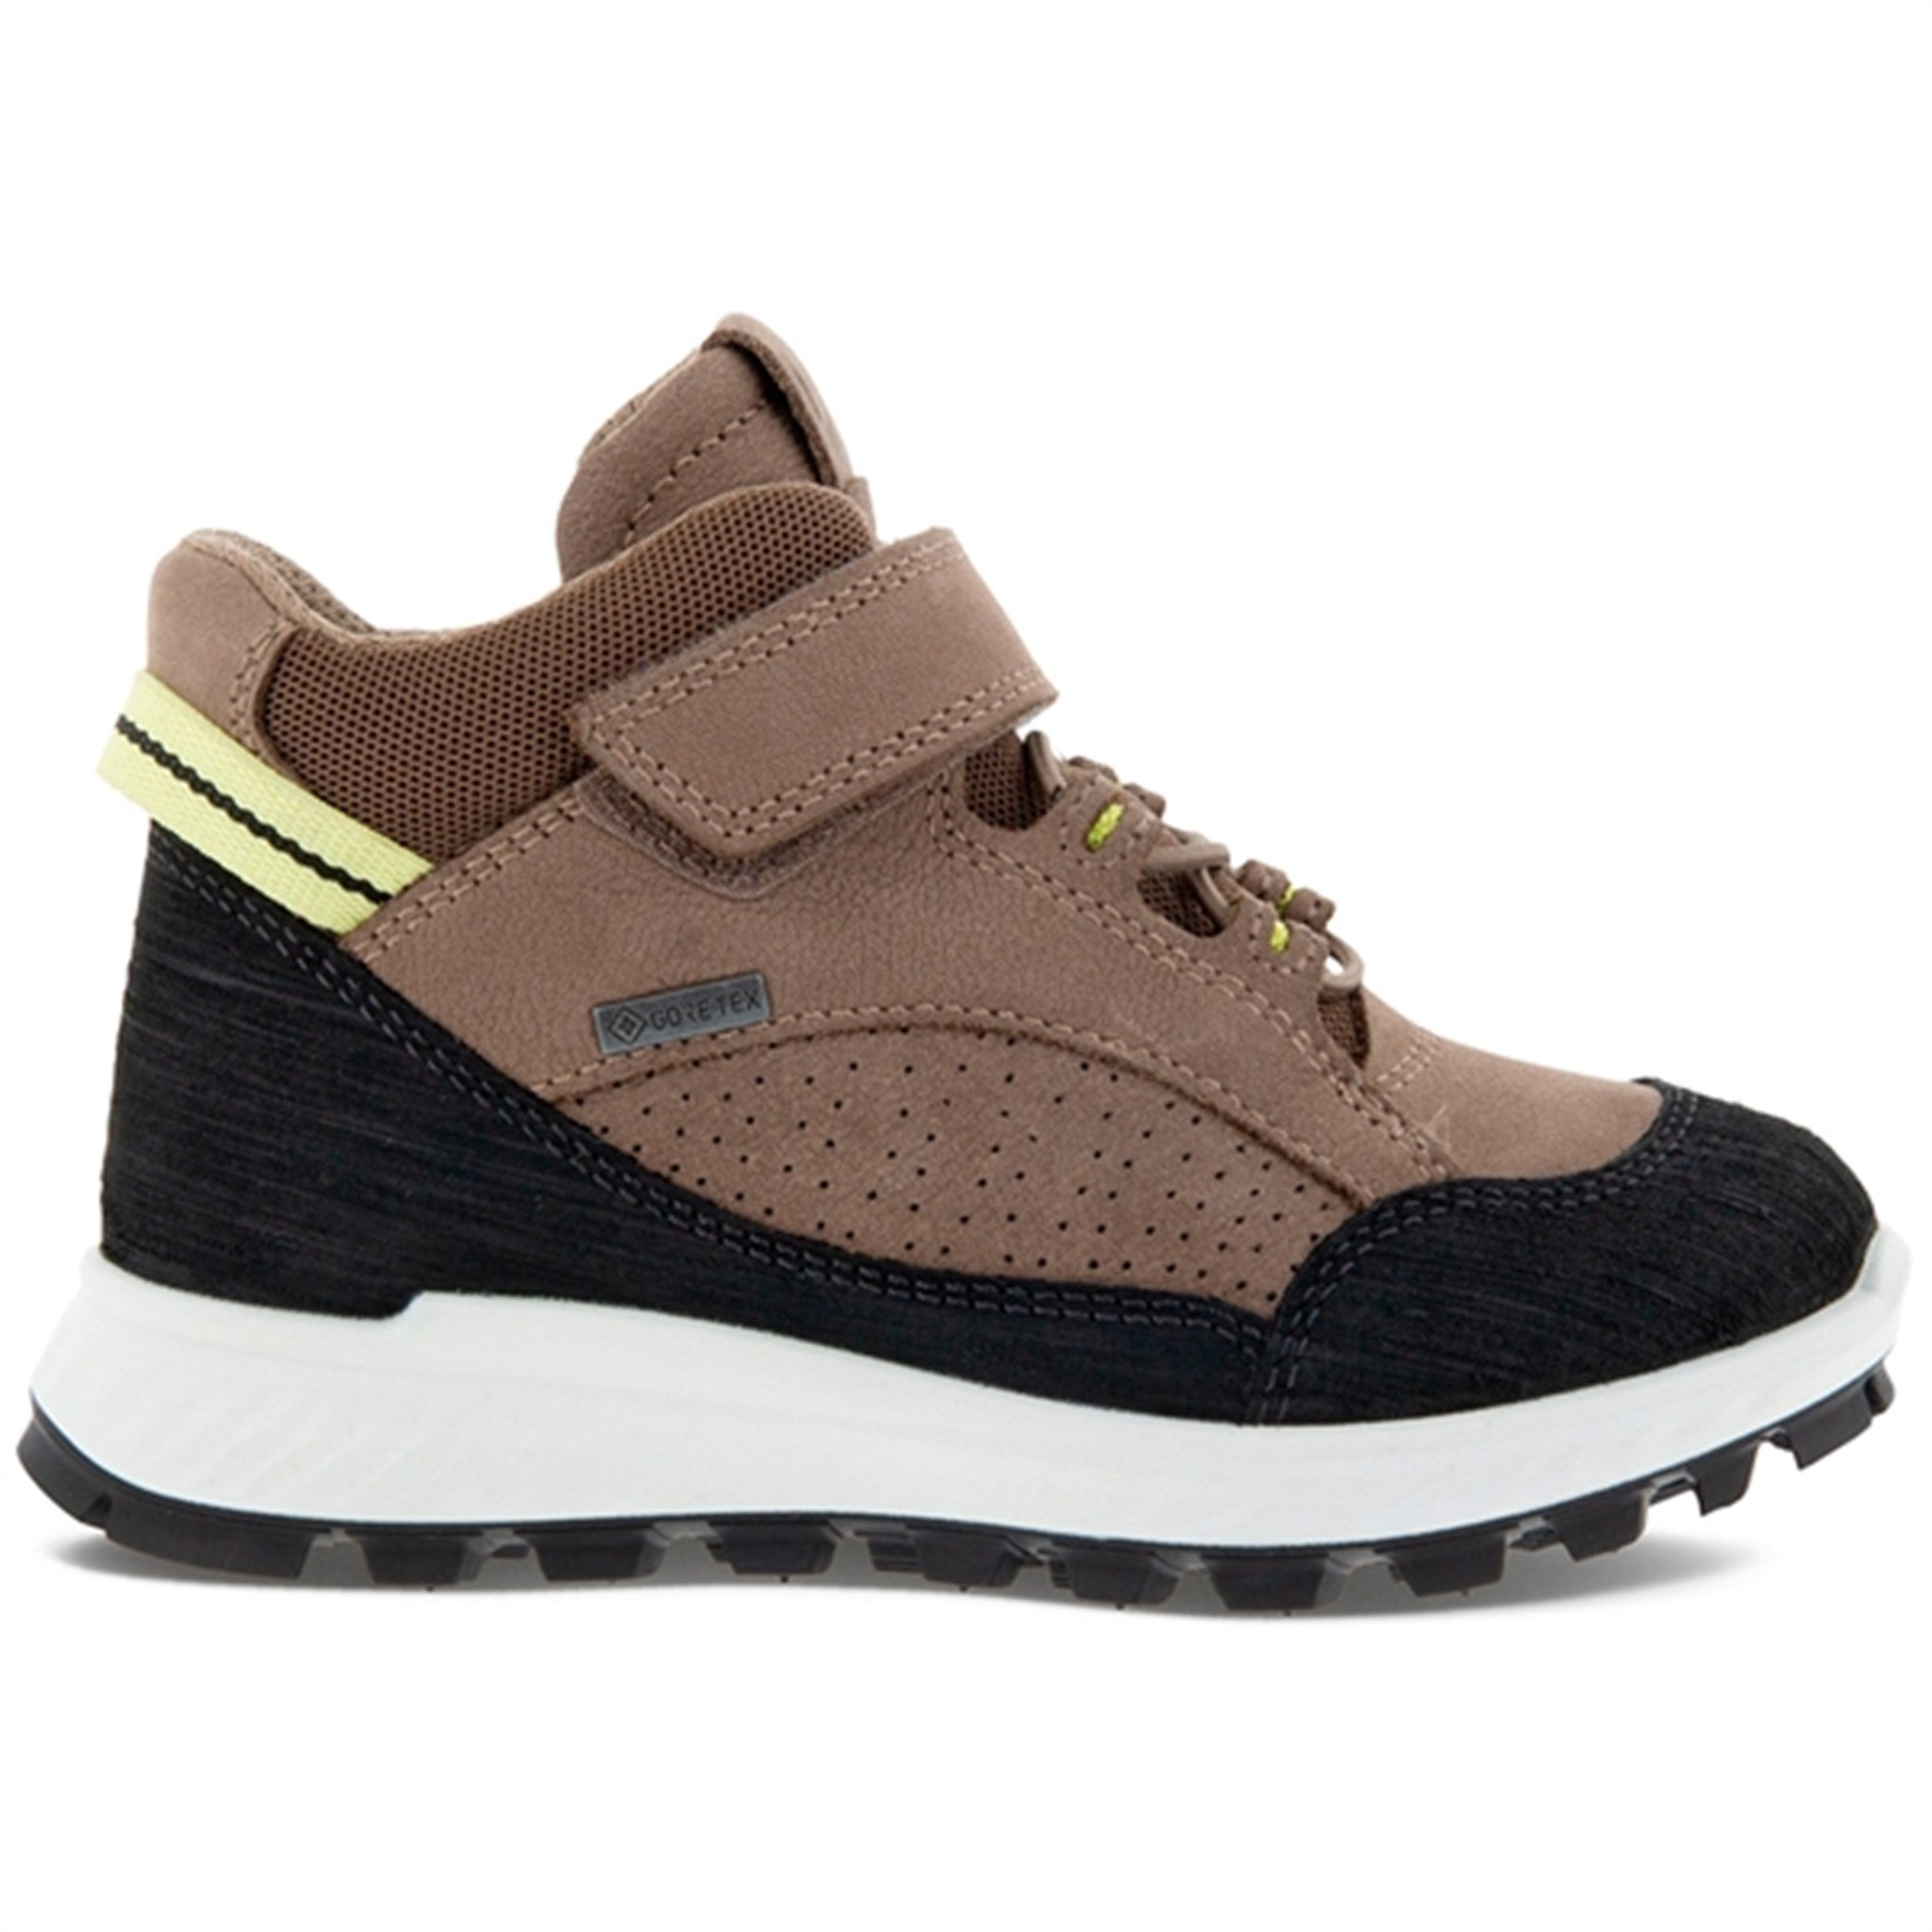 Ecco Exostrike Kids Ankle Boot Black/Taupe/Taupe 2